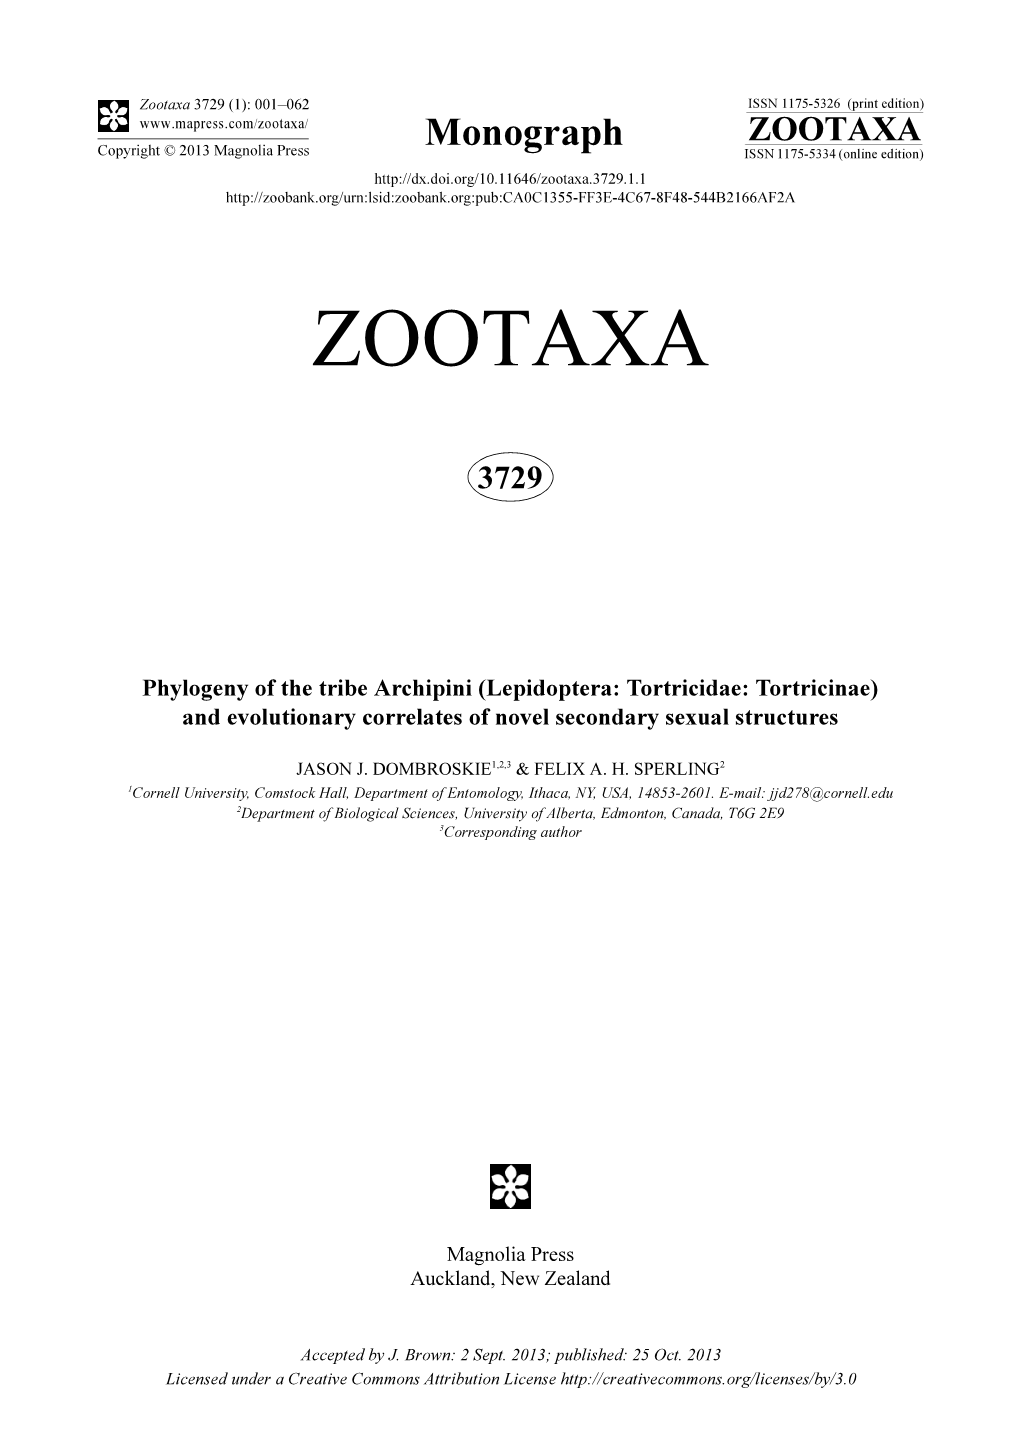 Lepidoptera: Tortricidae: Tortricinae) and Evolutionary Correlates of Novel Secondary Sexual Structures